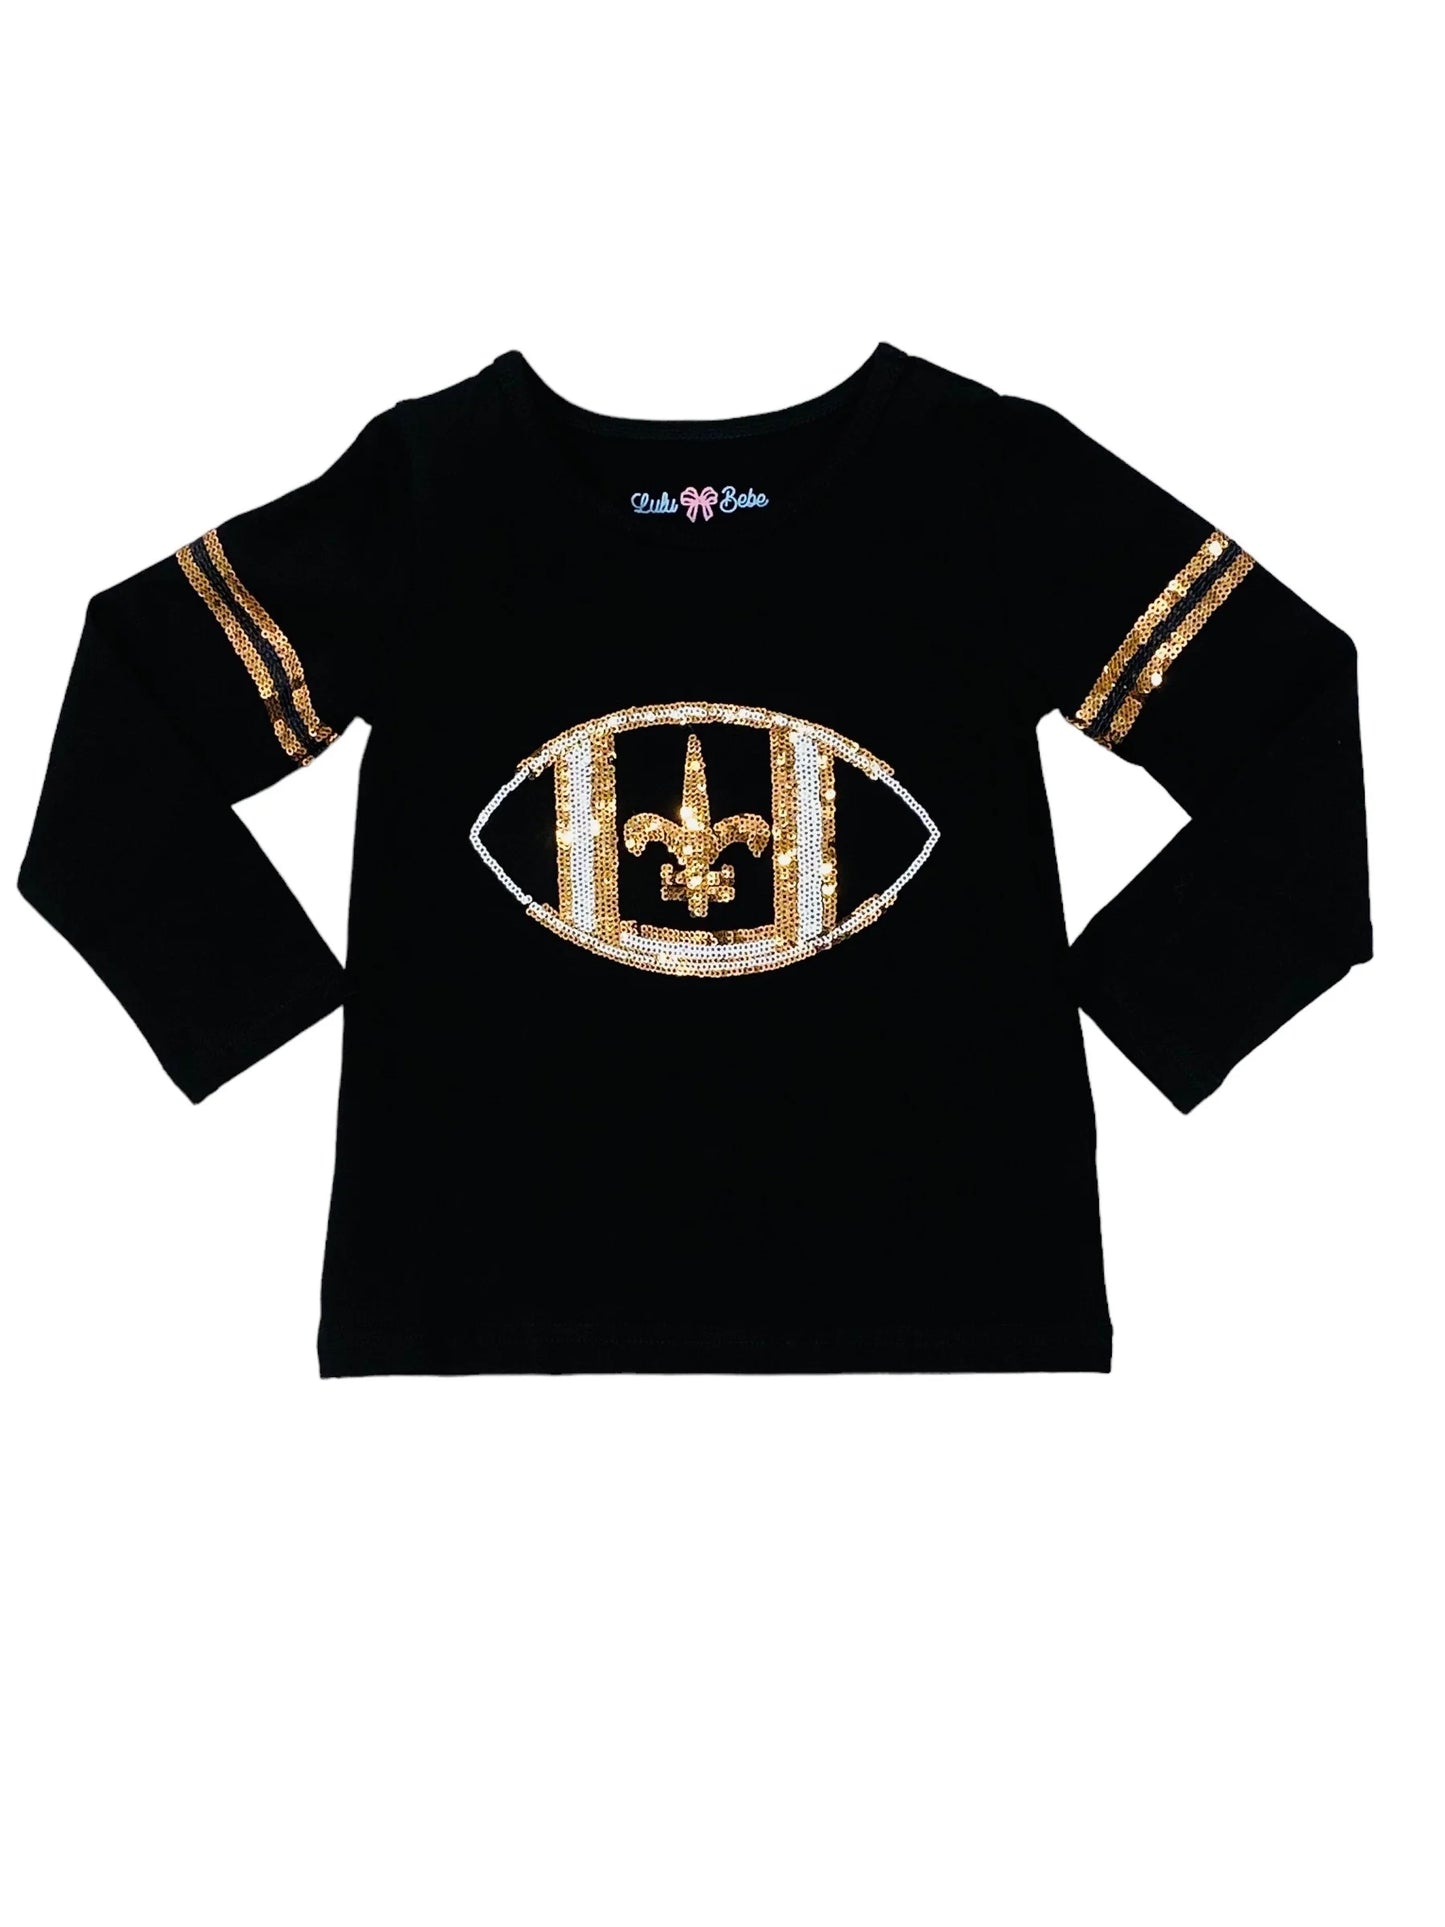 Sequin Black and Gold Tee